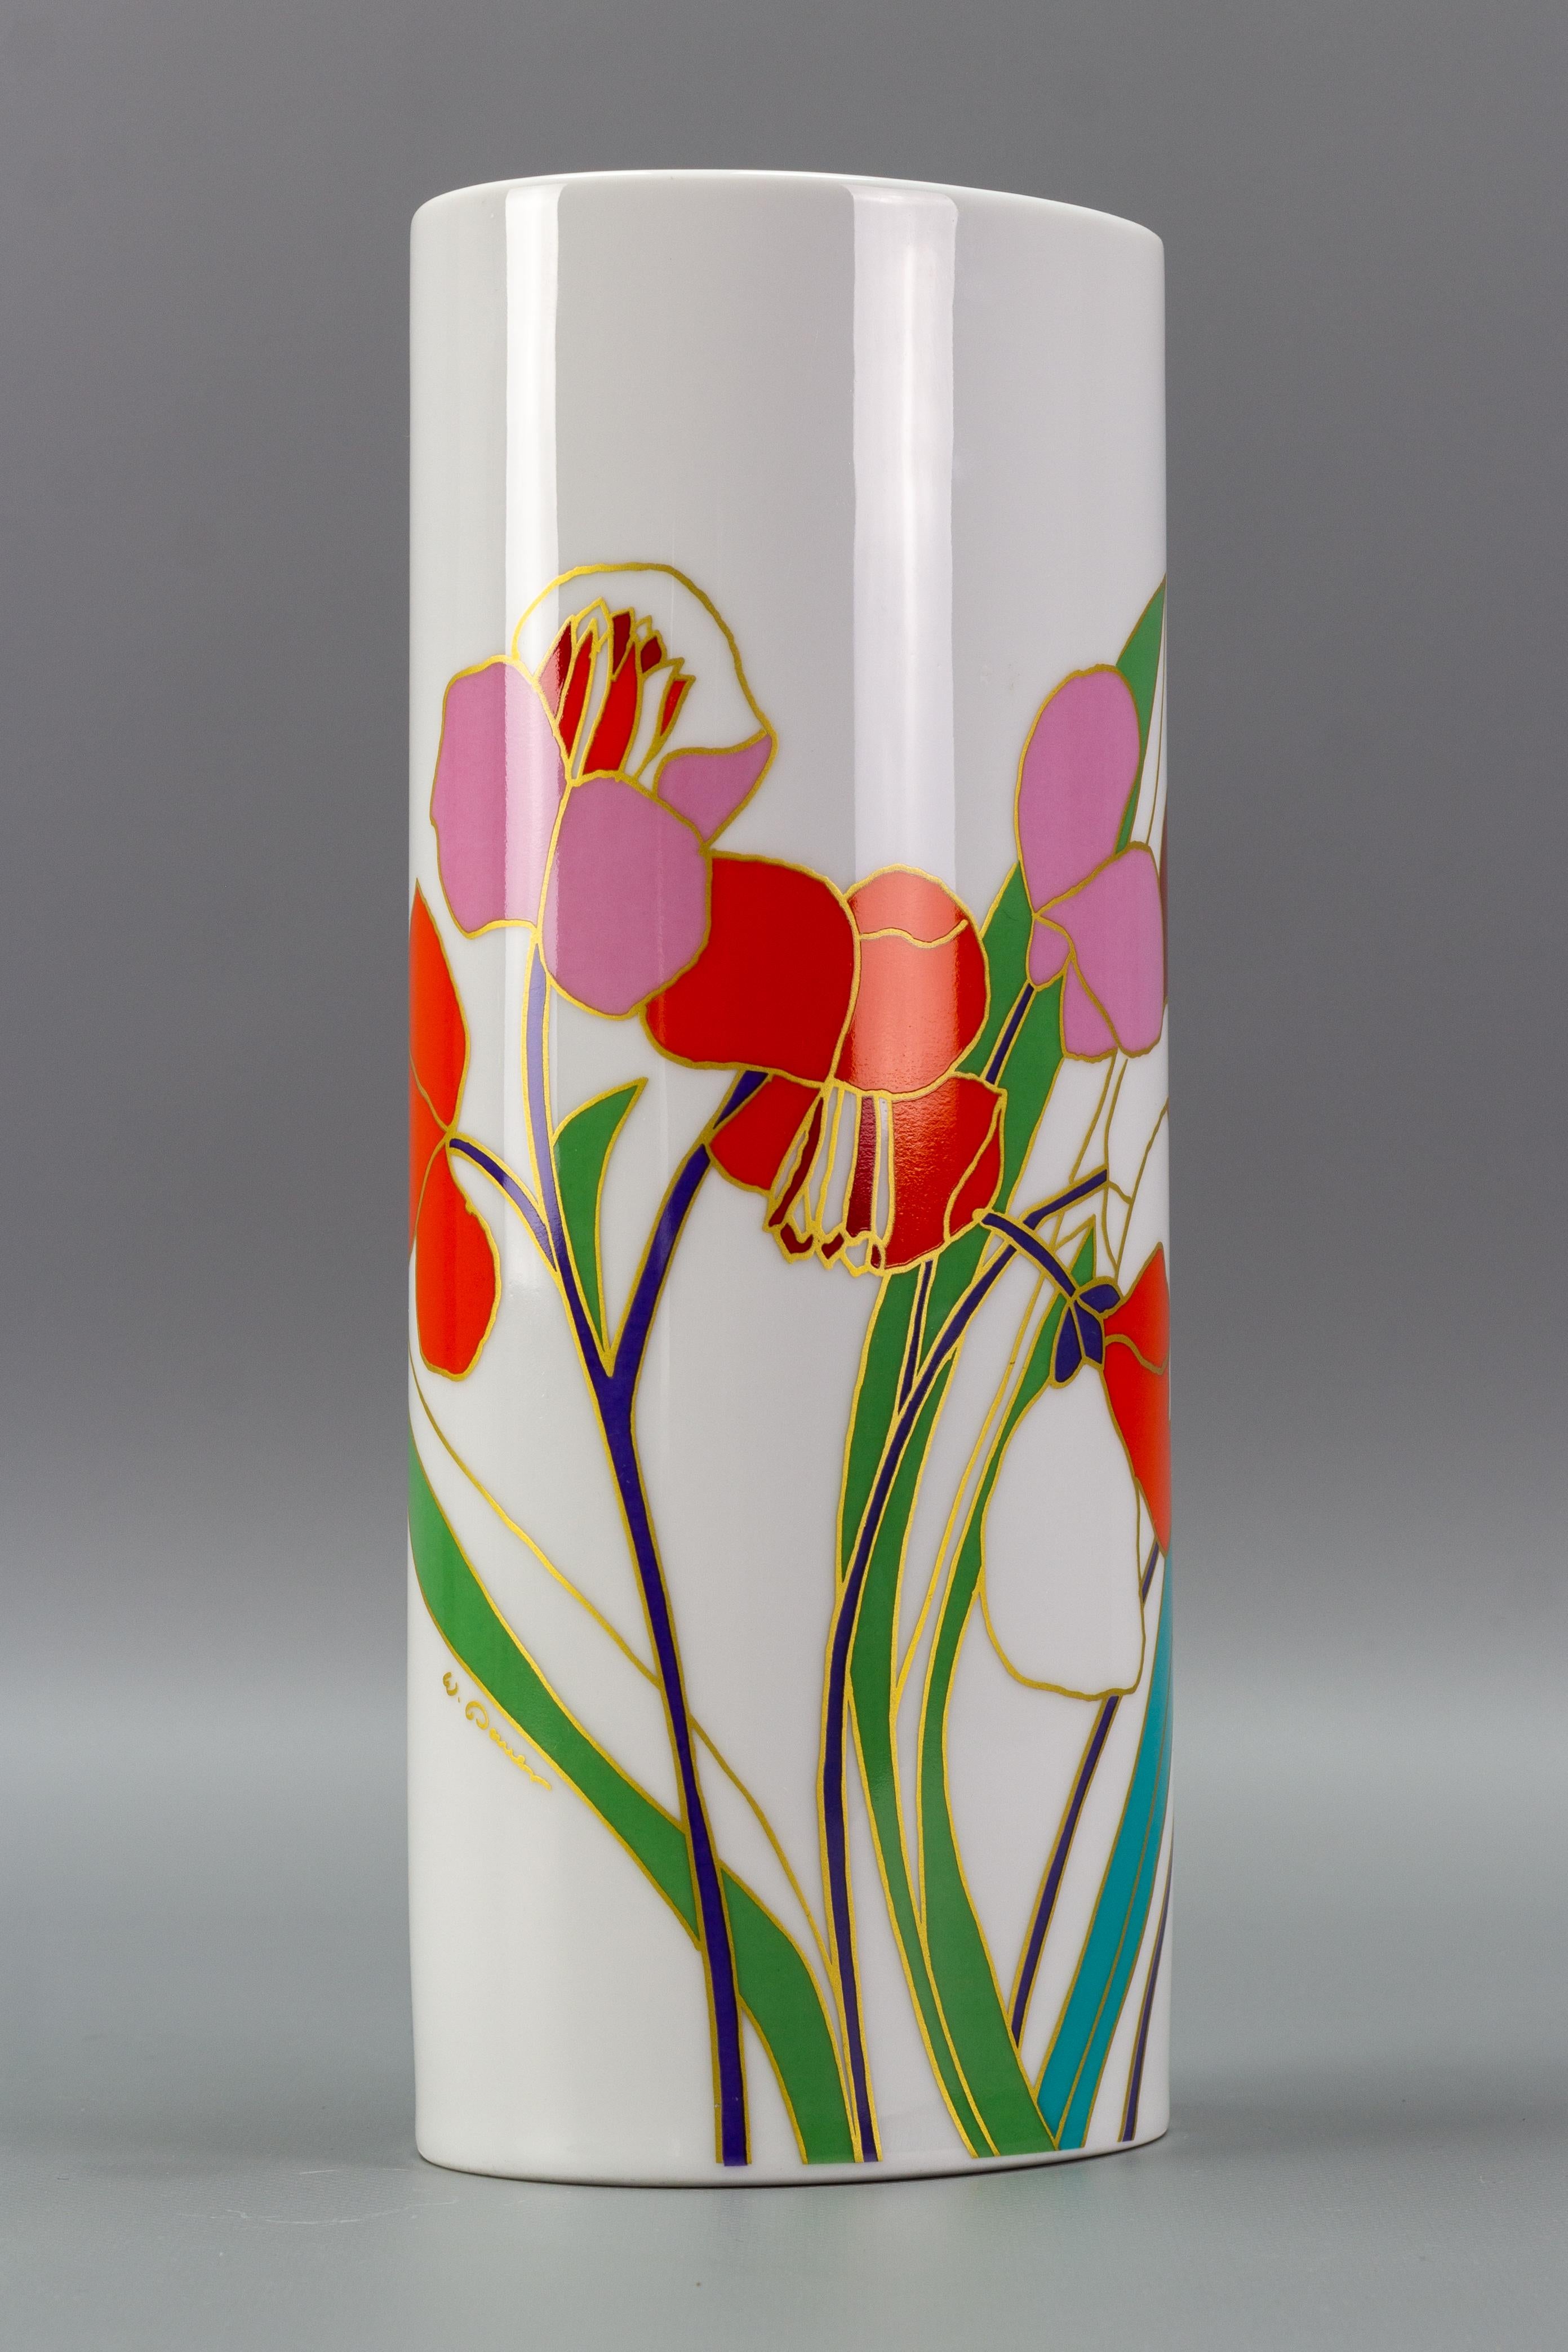 A hand-painted Rosenthal porcelain vase designed by Wolf Bauer, the Studio-Linie line, Germany, 1970s-1980s. 
The white porcelain vase is in a cylindrical form and is adorned with brightly colored flowers and leaves outlined in gold.
The vase is